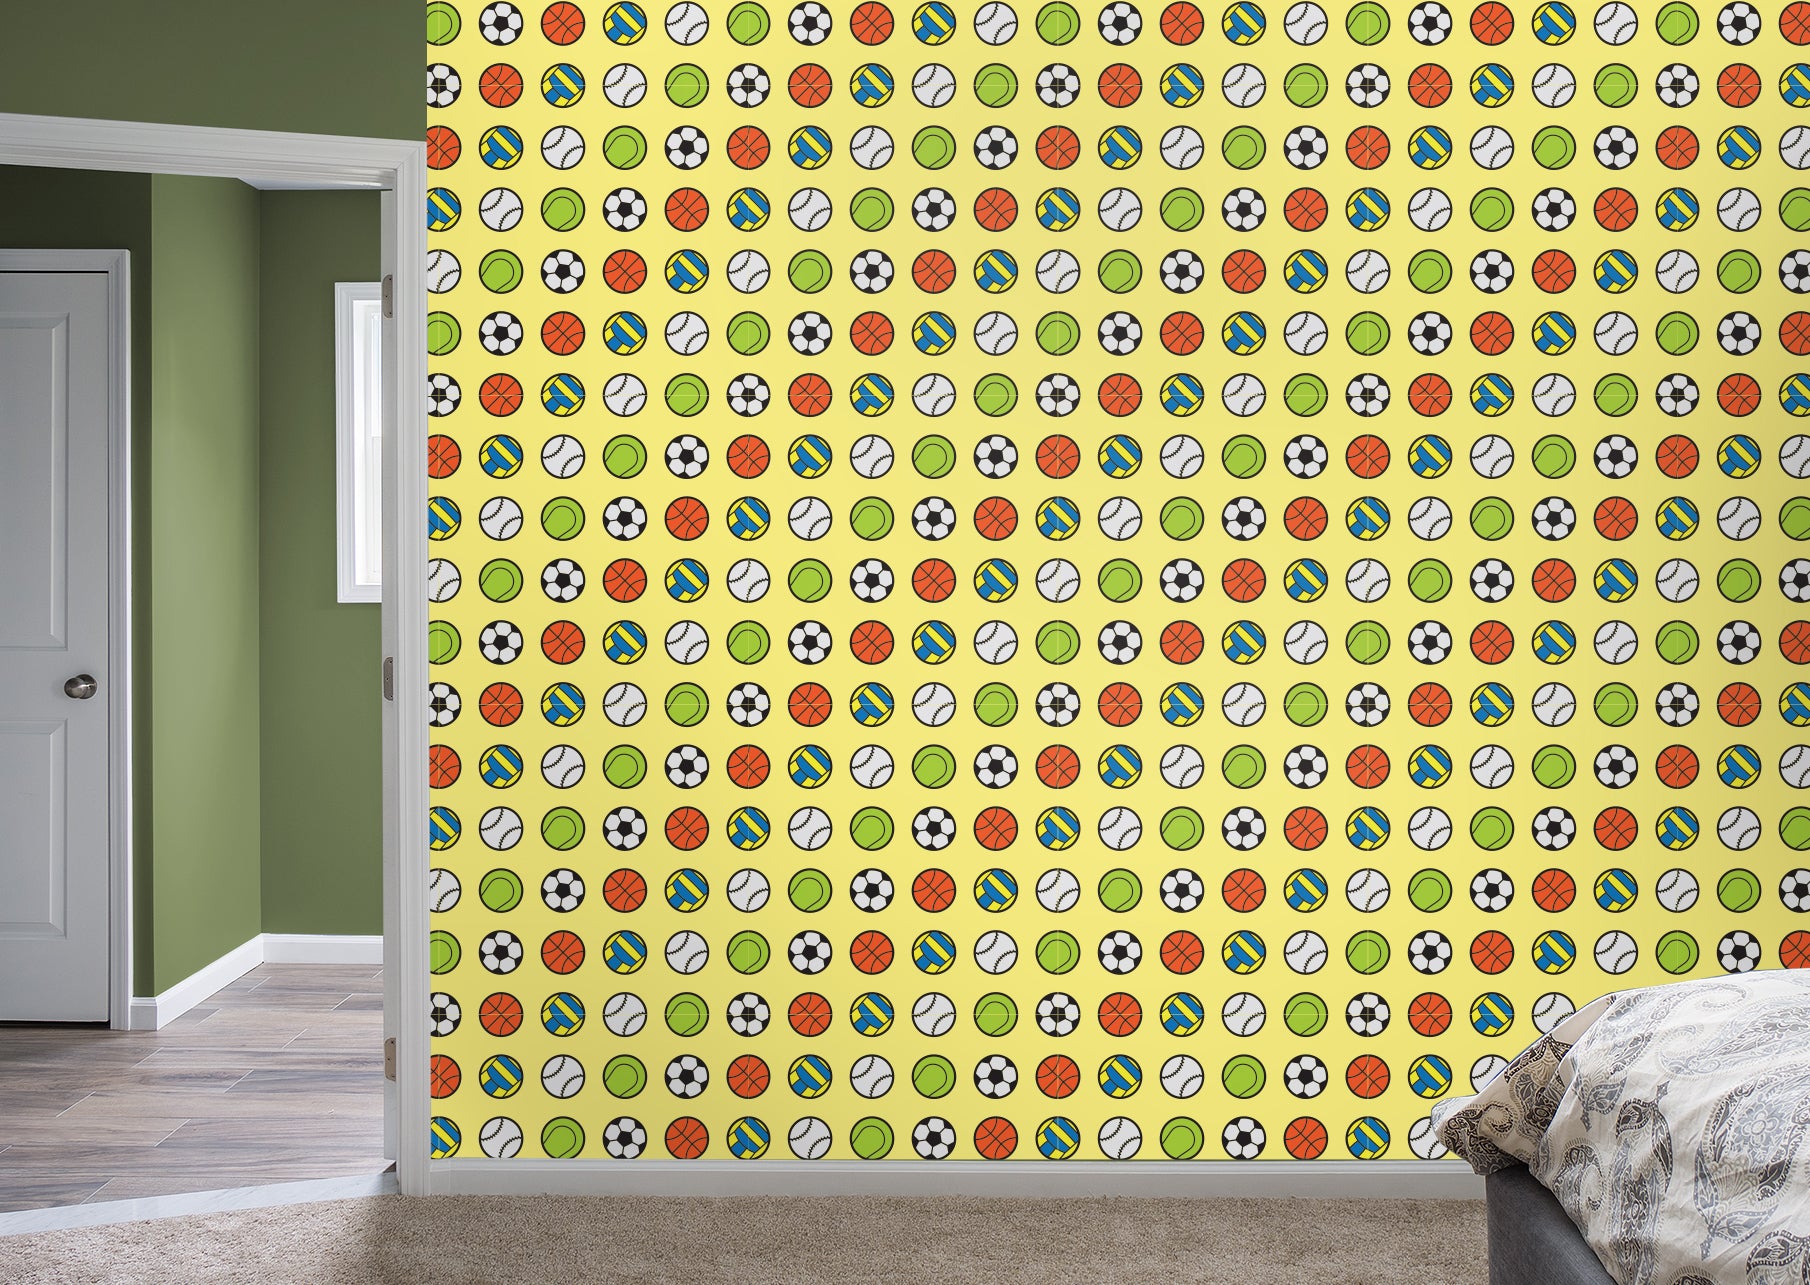 Calling All Sports for Sports & Activities - Yellow for Sports & Activities - Peel & Stick Wallpaper 12" x 12" Sample by Fathead